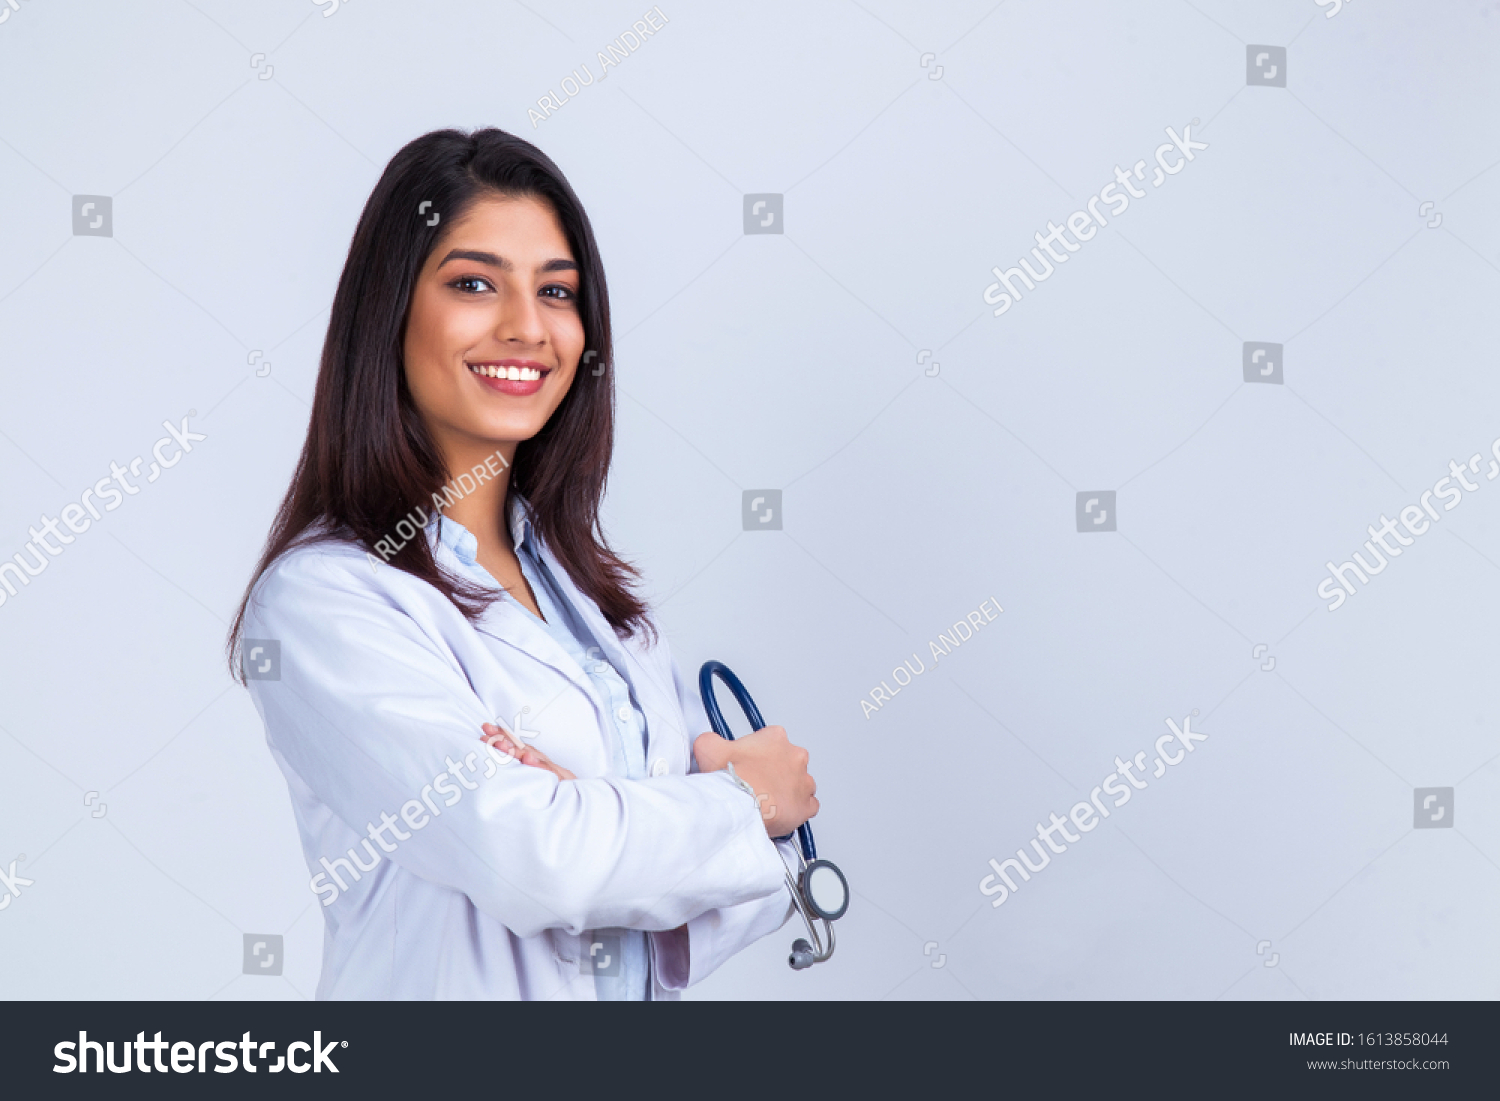 Medical concept of Indian beautiful female doctor in white coat with stethoscope, waist up. Medical student. Woman hospital worker looking at camera and smiling, studio, gray background #1613858044